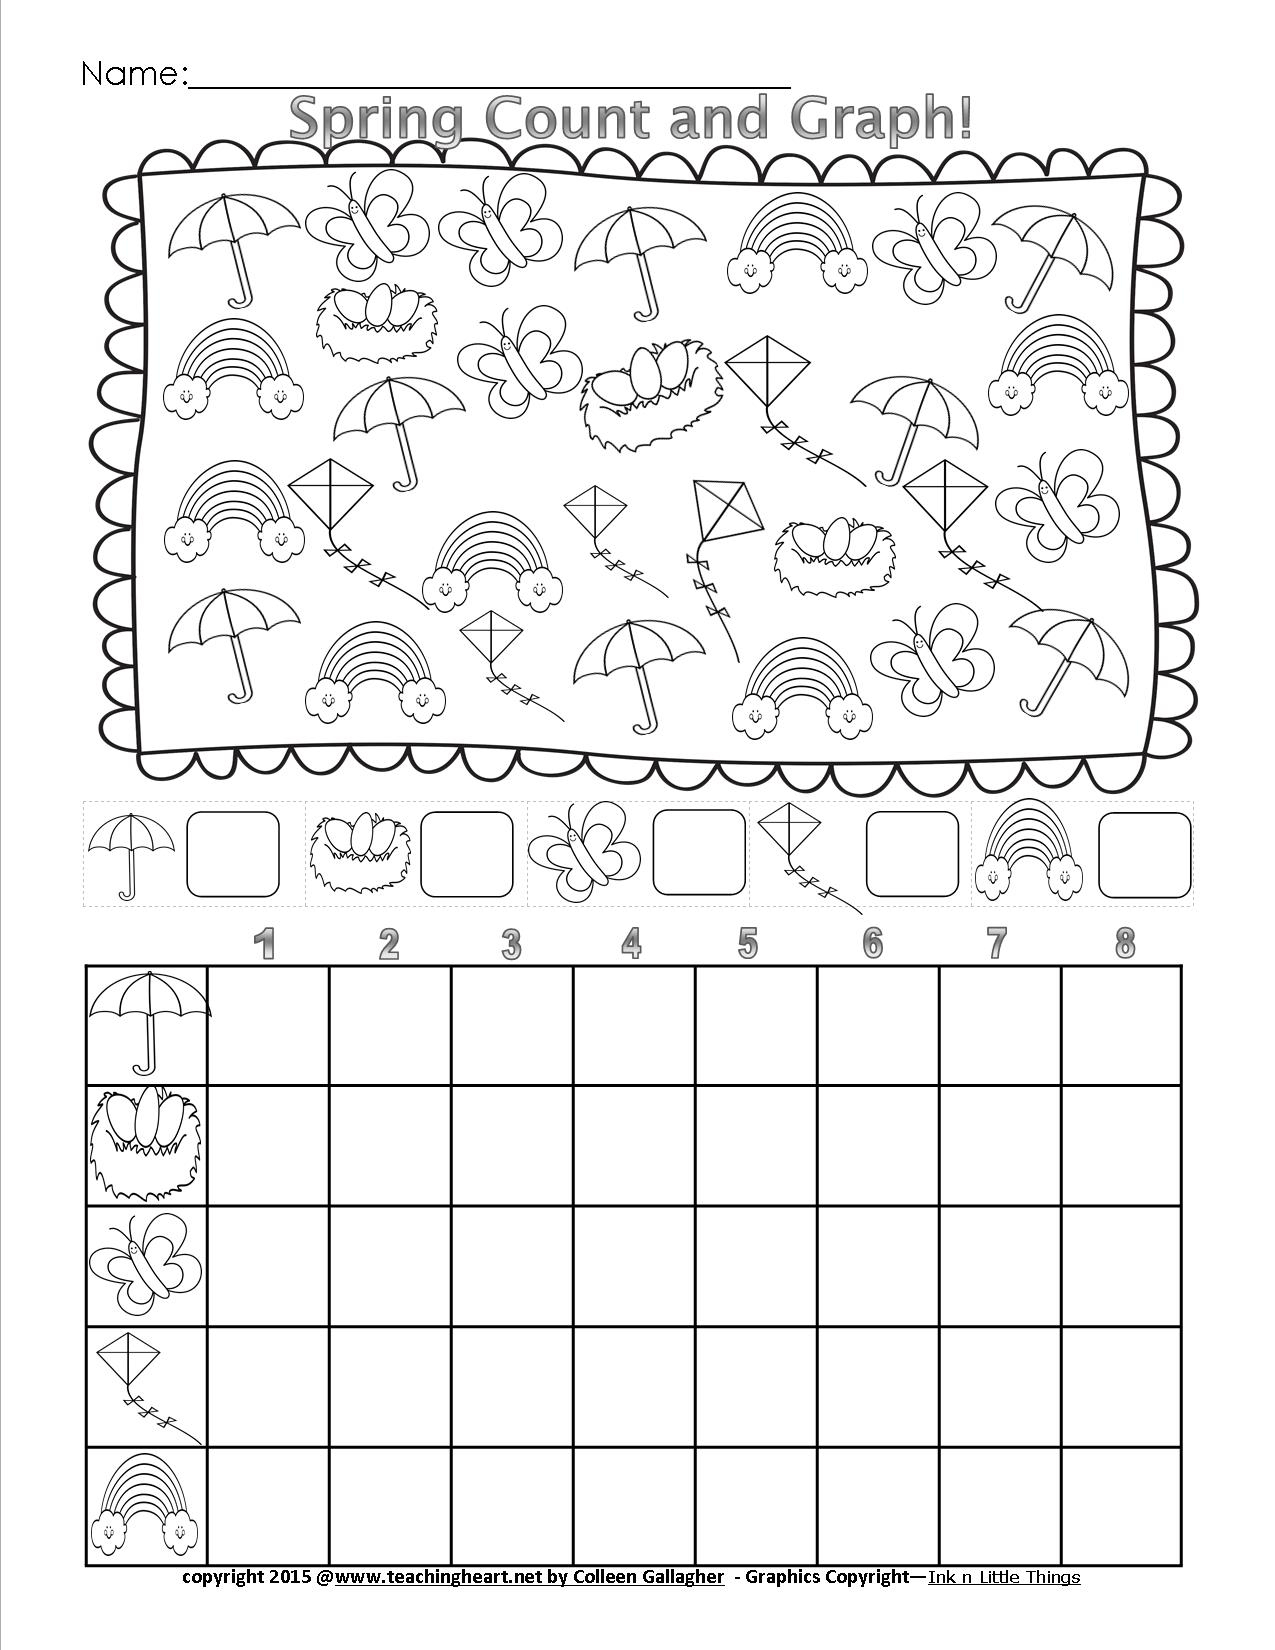 Plotting Coordinate Points A Free Printable Graph Art Worksheets Lexia s Blog